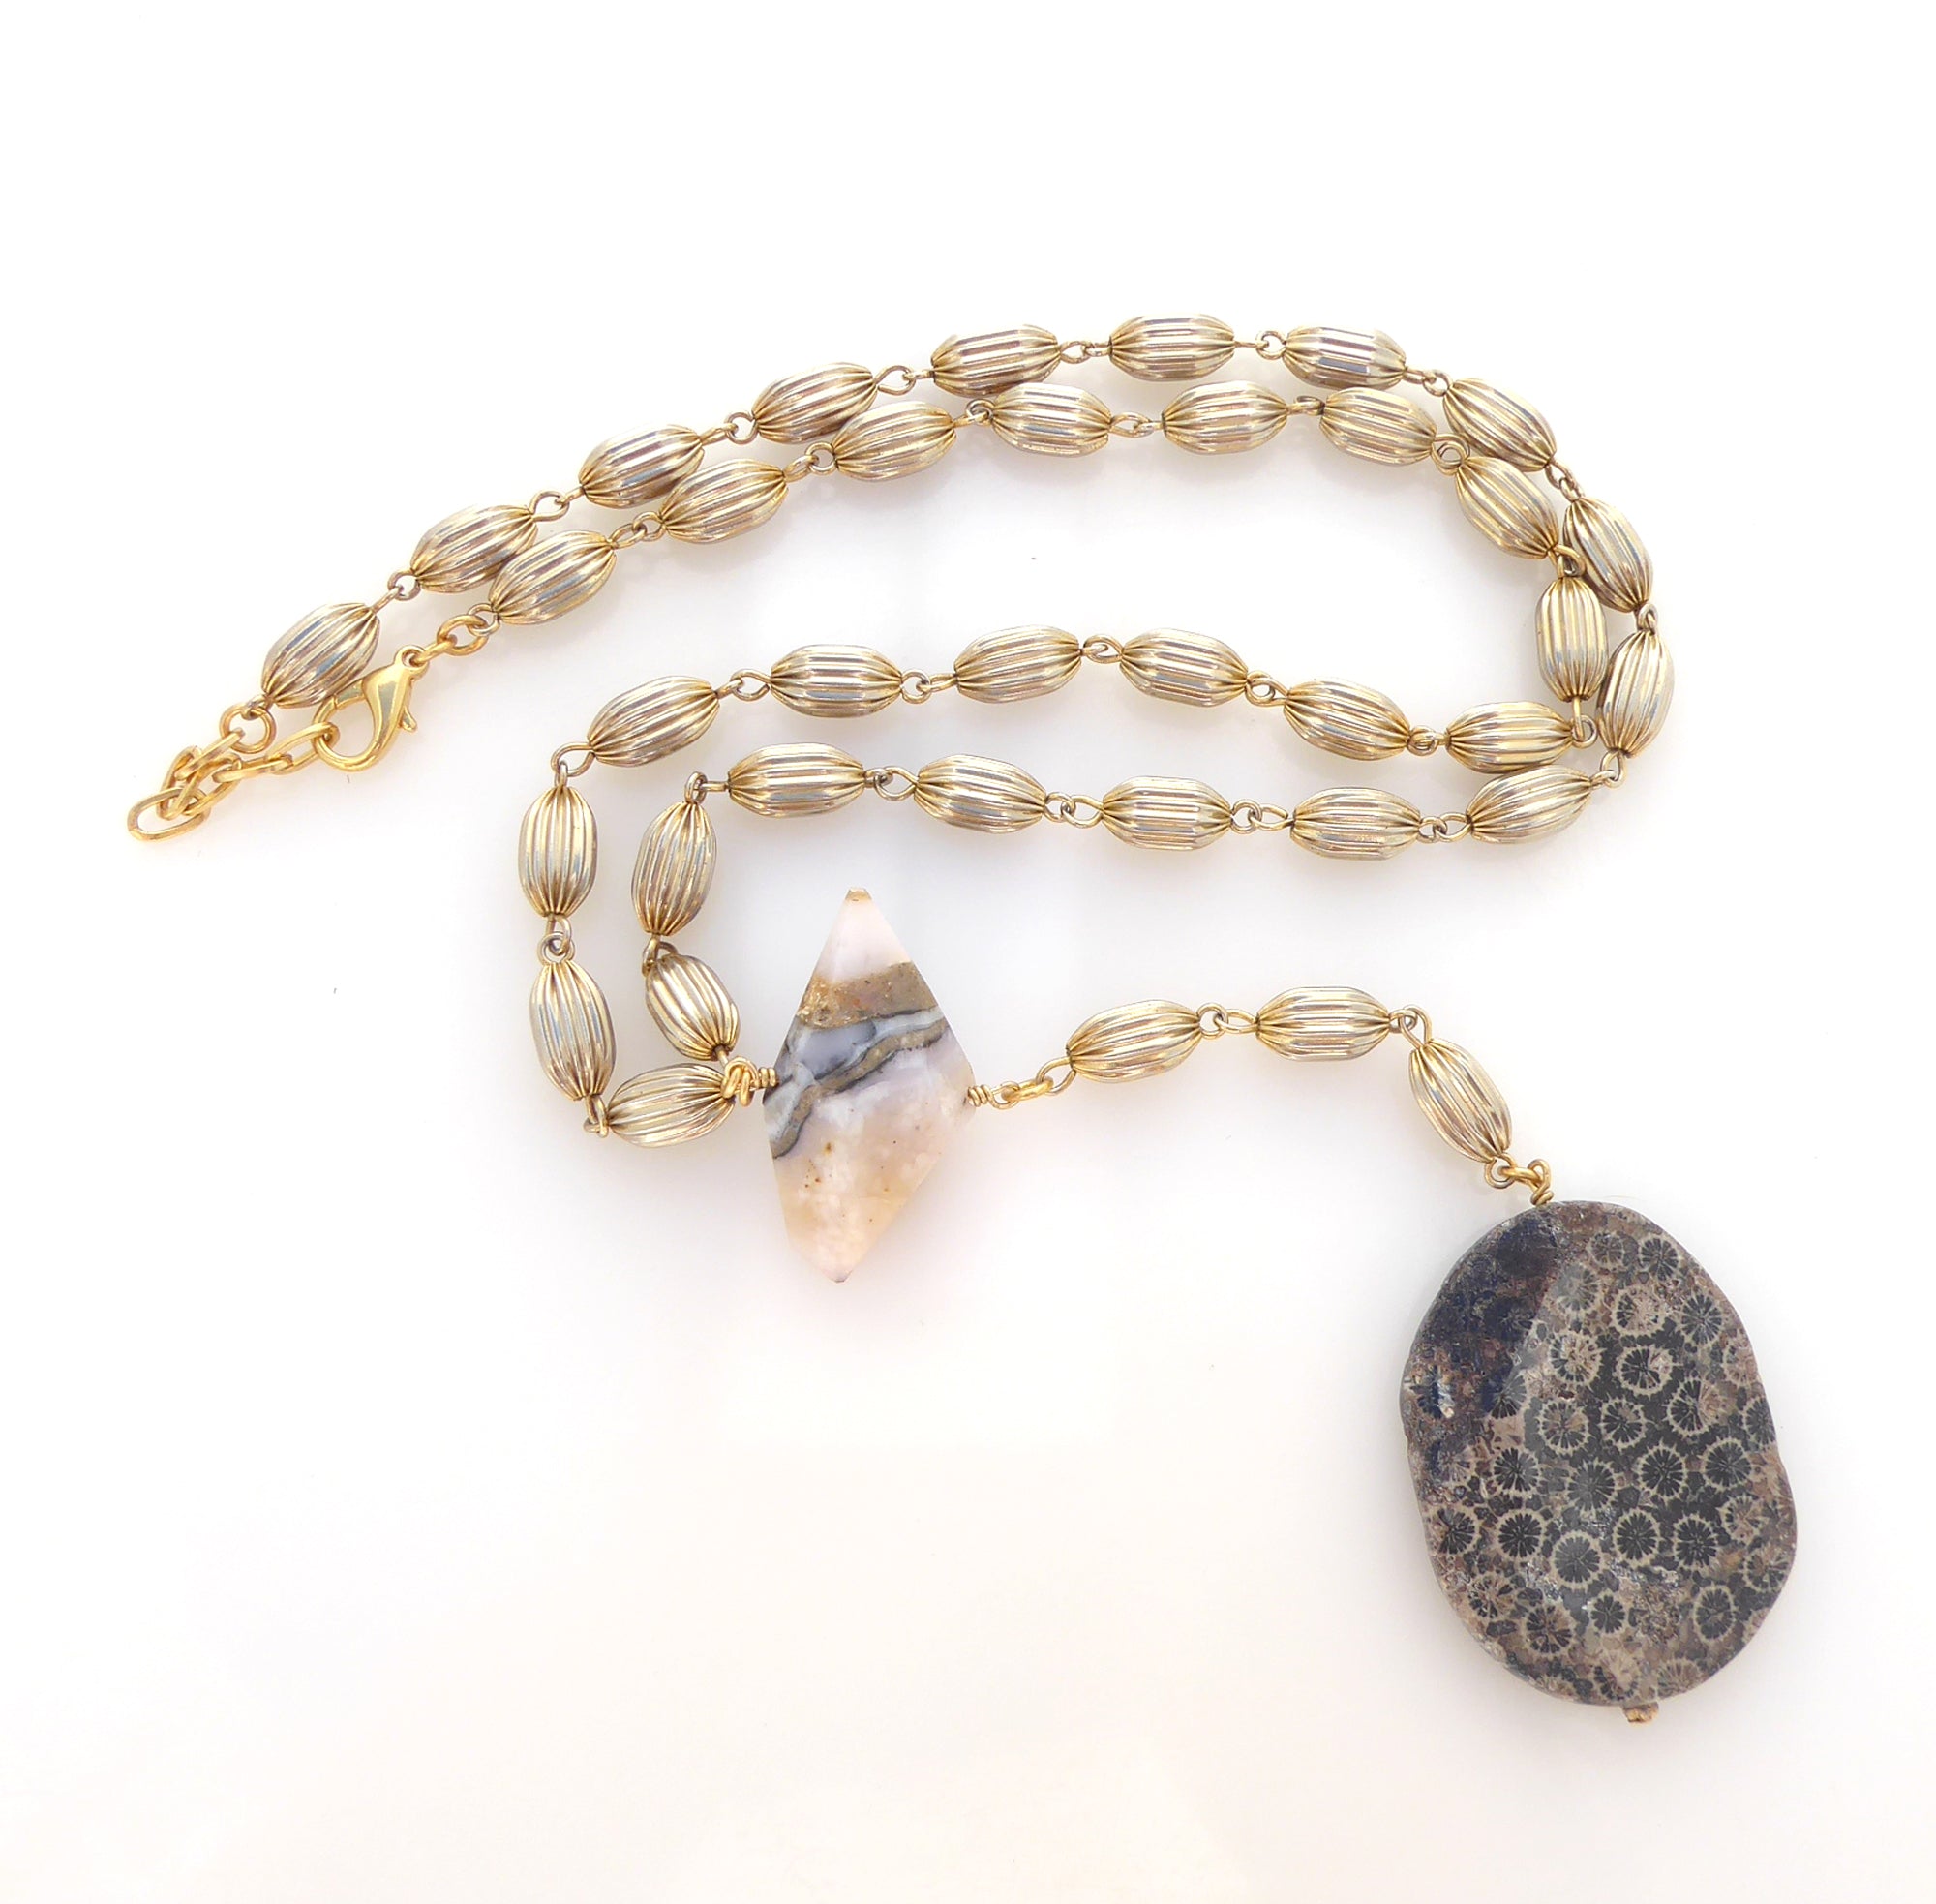 Delmara pink opal and fossilized coral necklace by Jenny Dayco 7